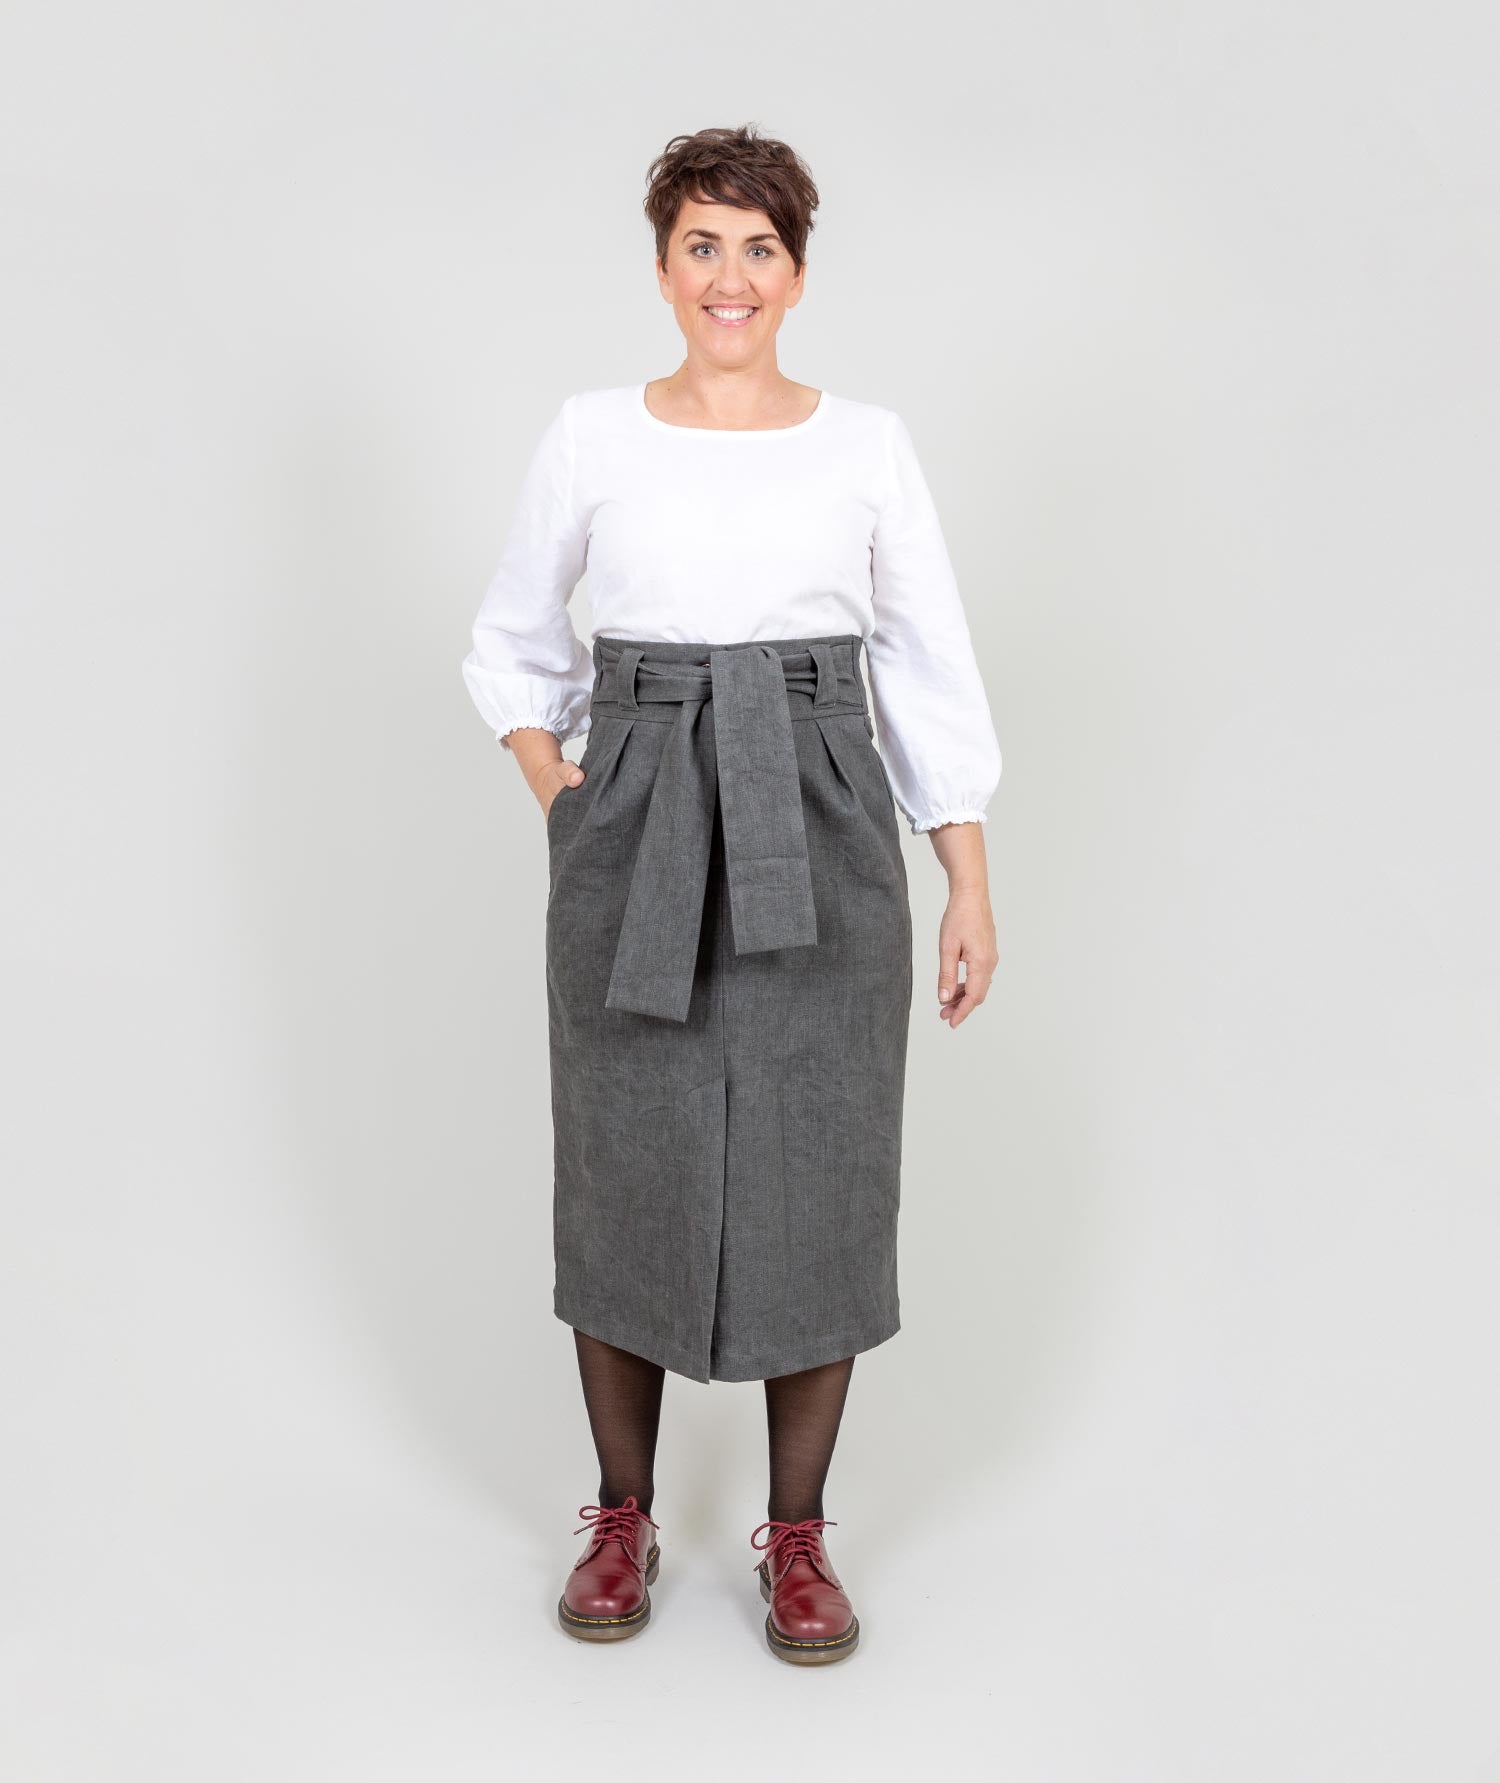 The "All Wrapped Up Skirt" - Grey